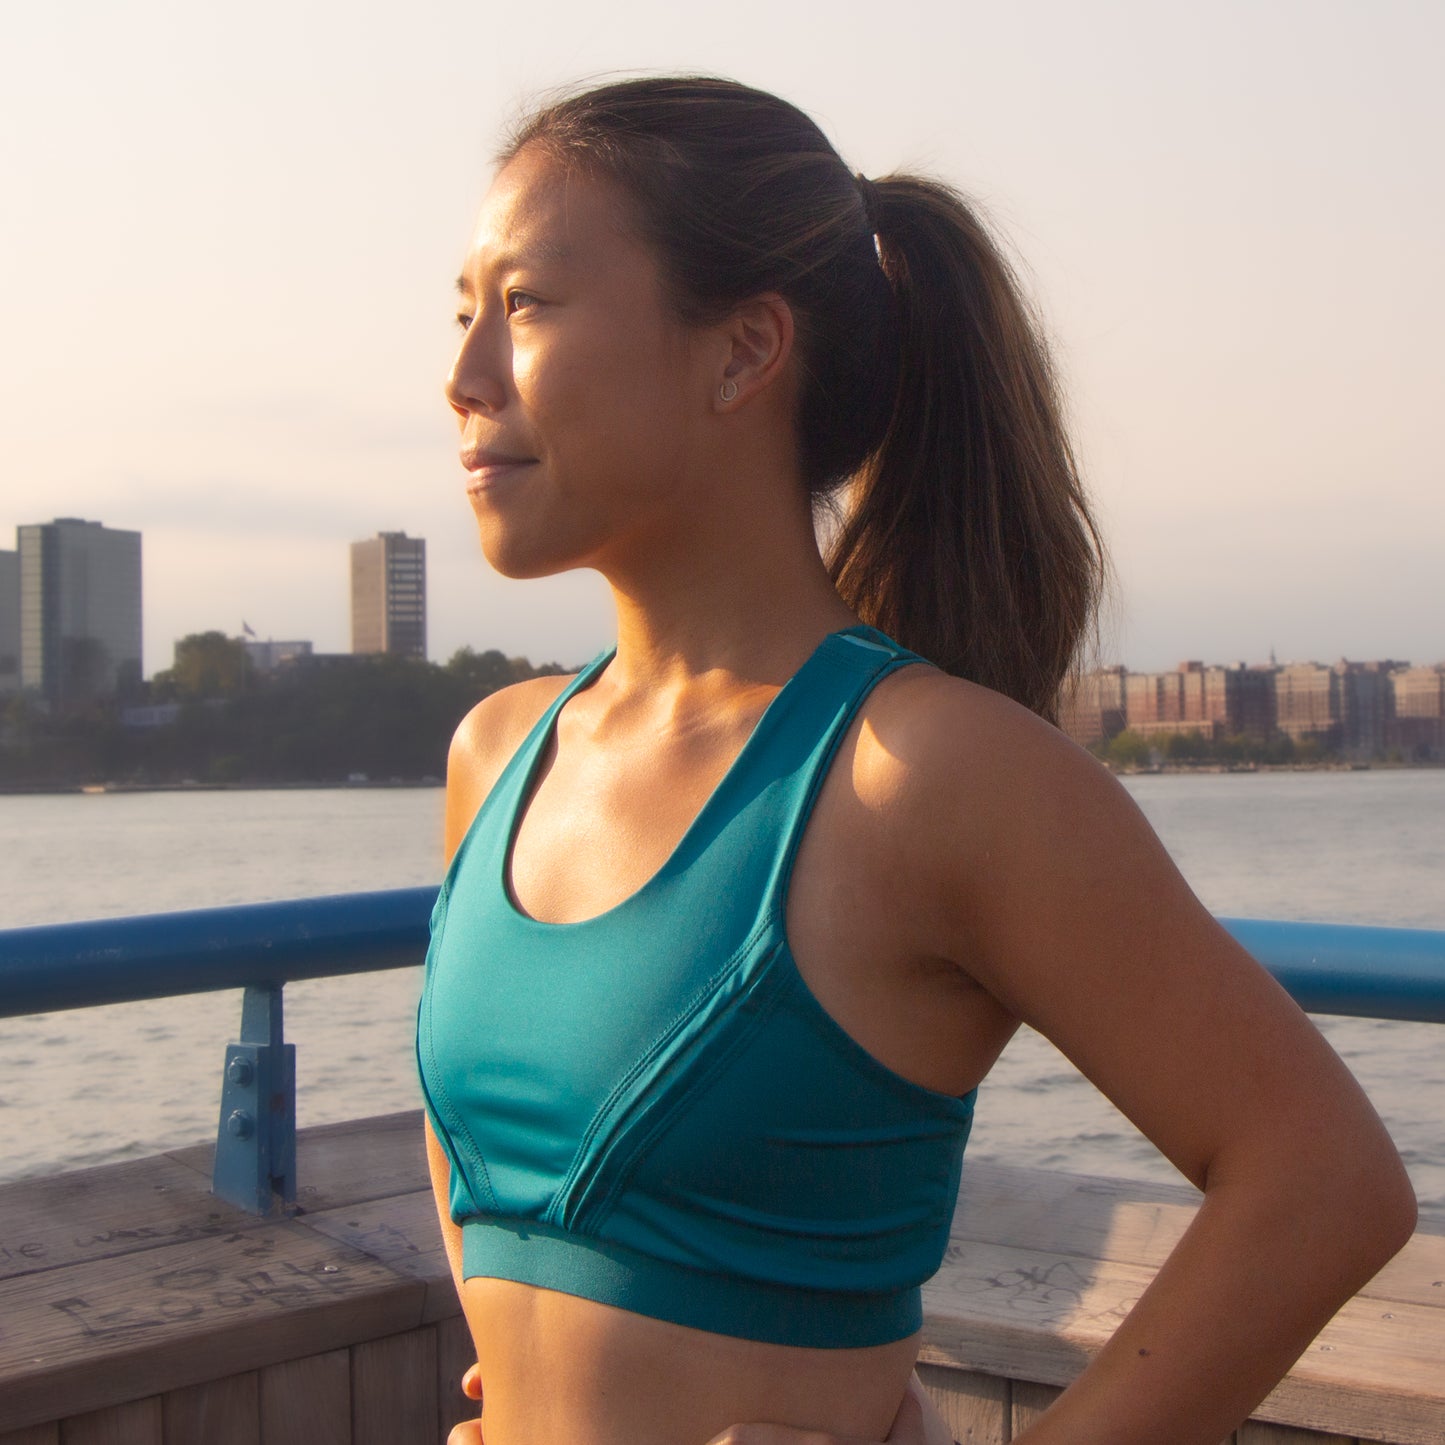 A photo of an east asian woman looking into the sun wearing a teal and mint sports bra